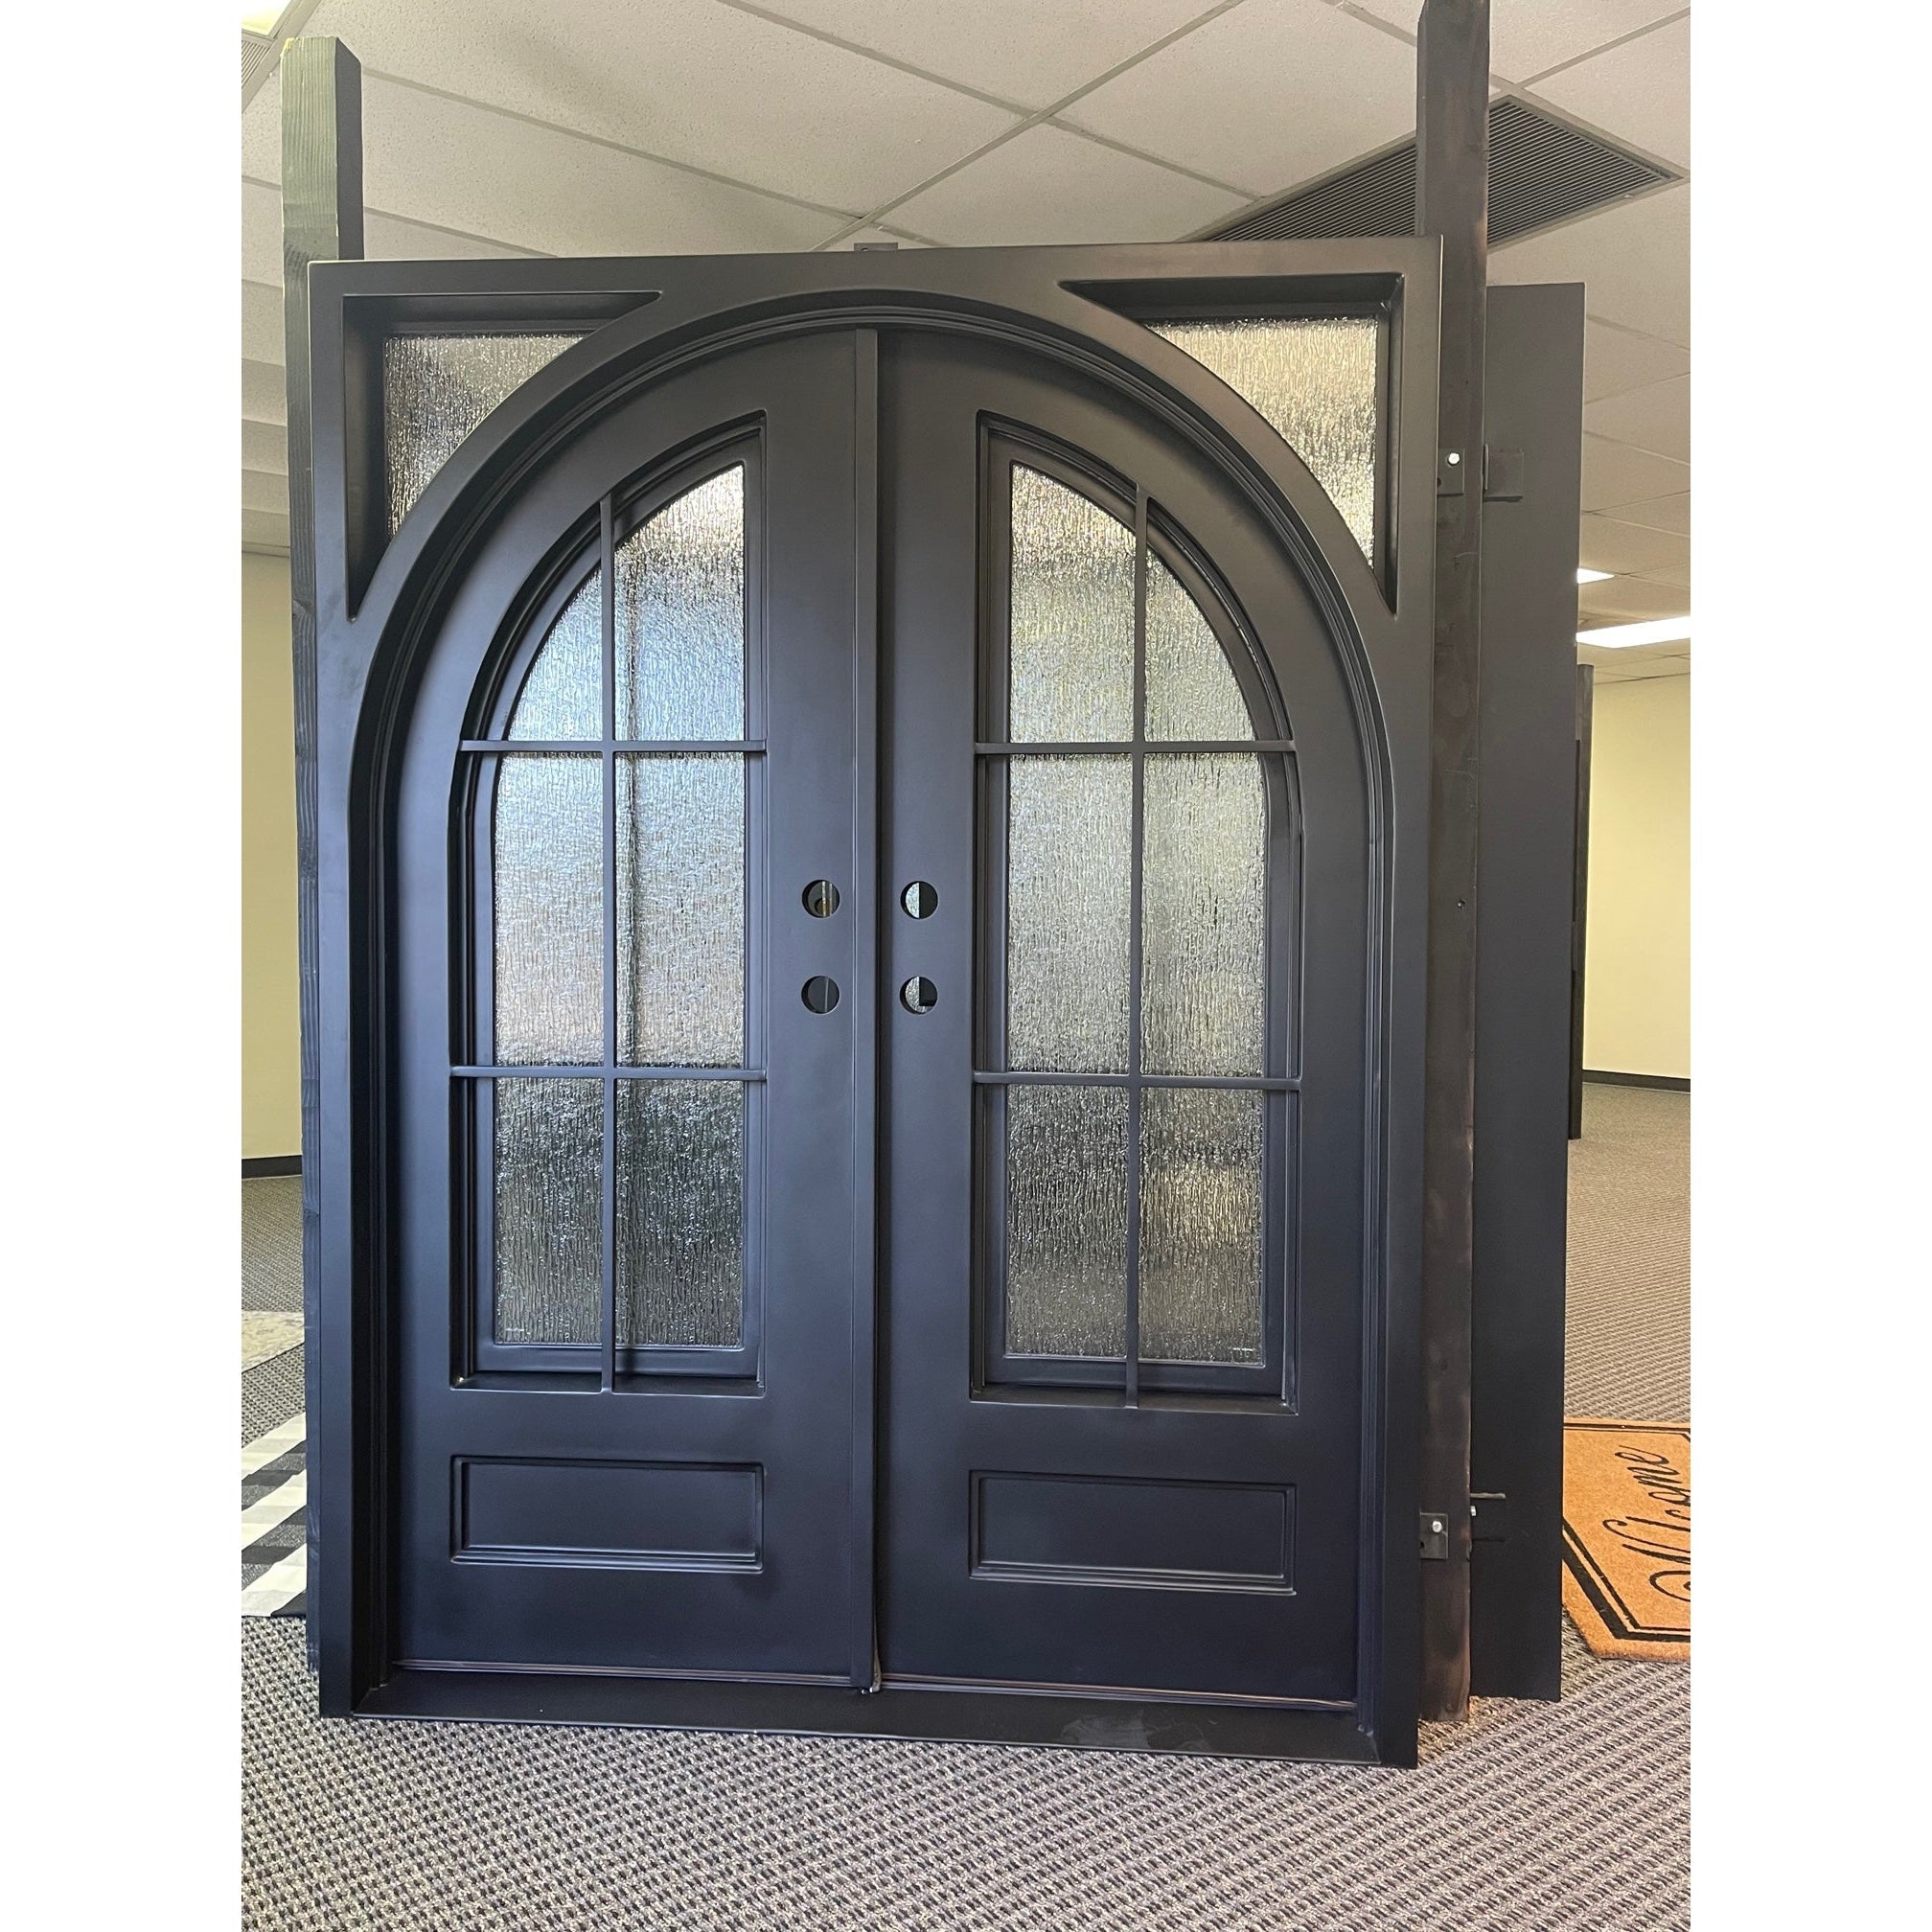 Arched Double Doors Interior: French, Panel, Curved, Raised & More